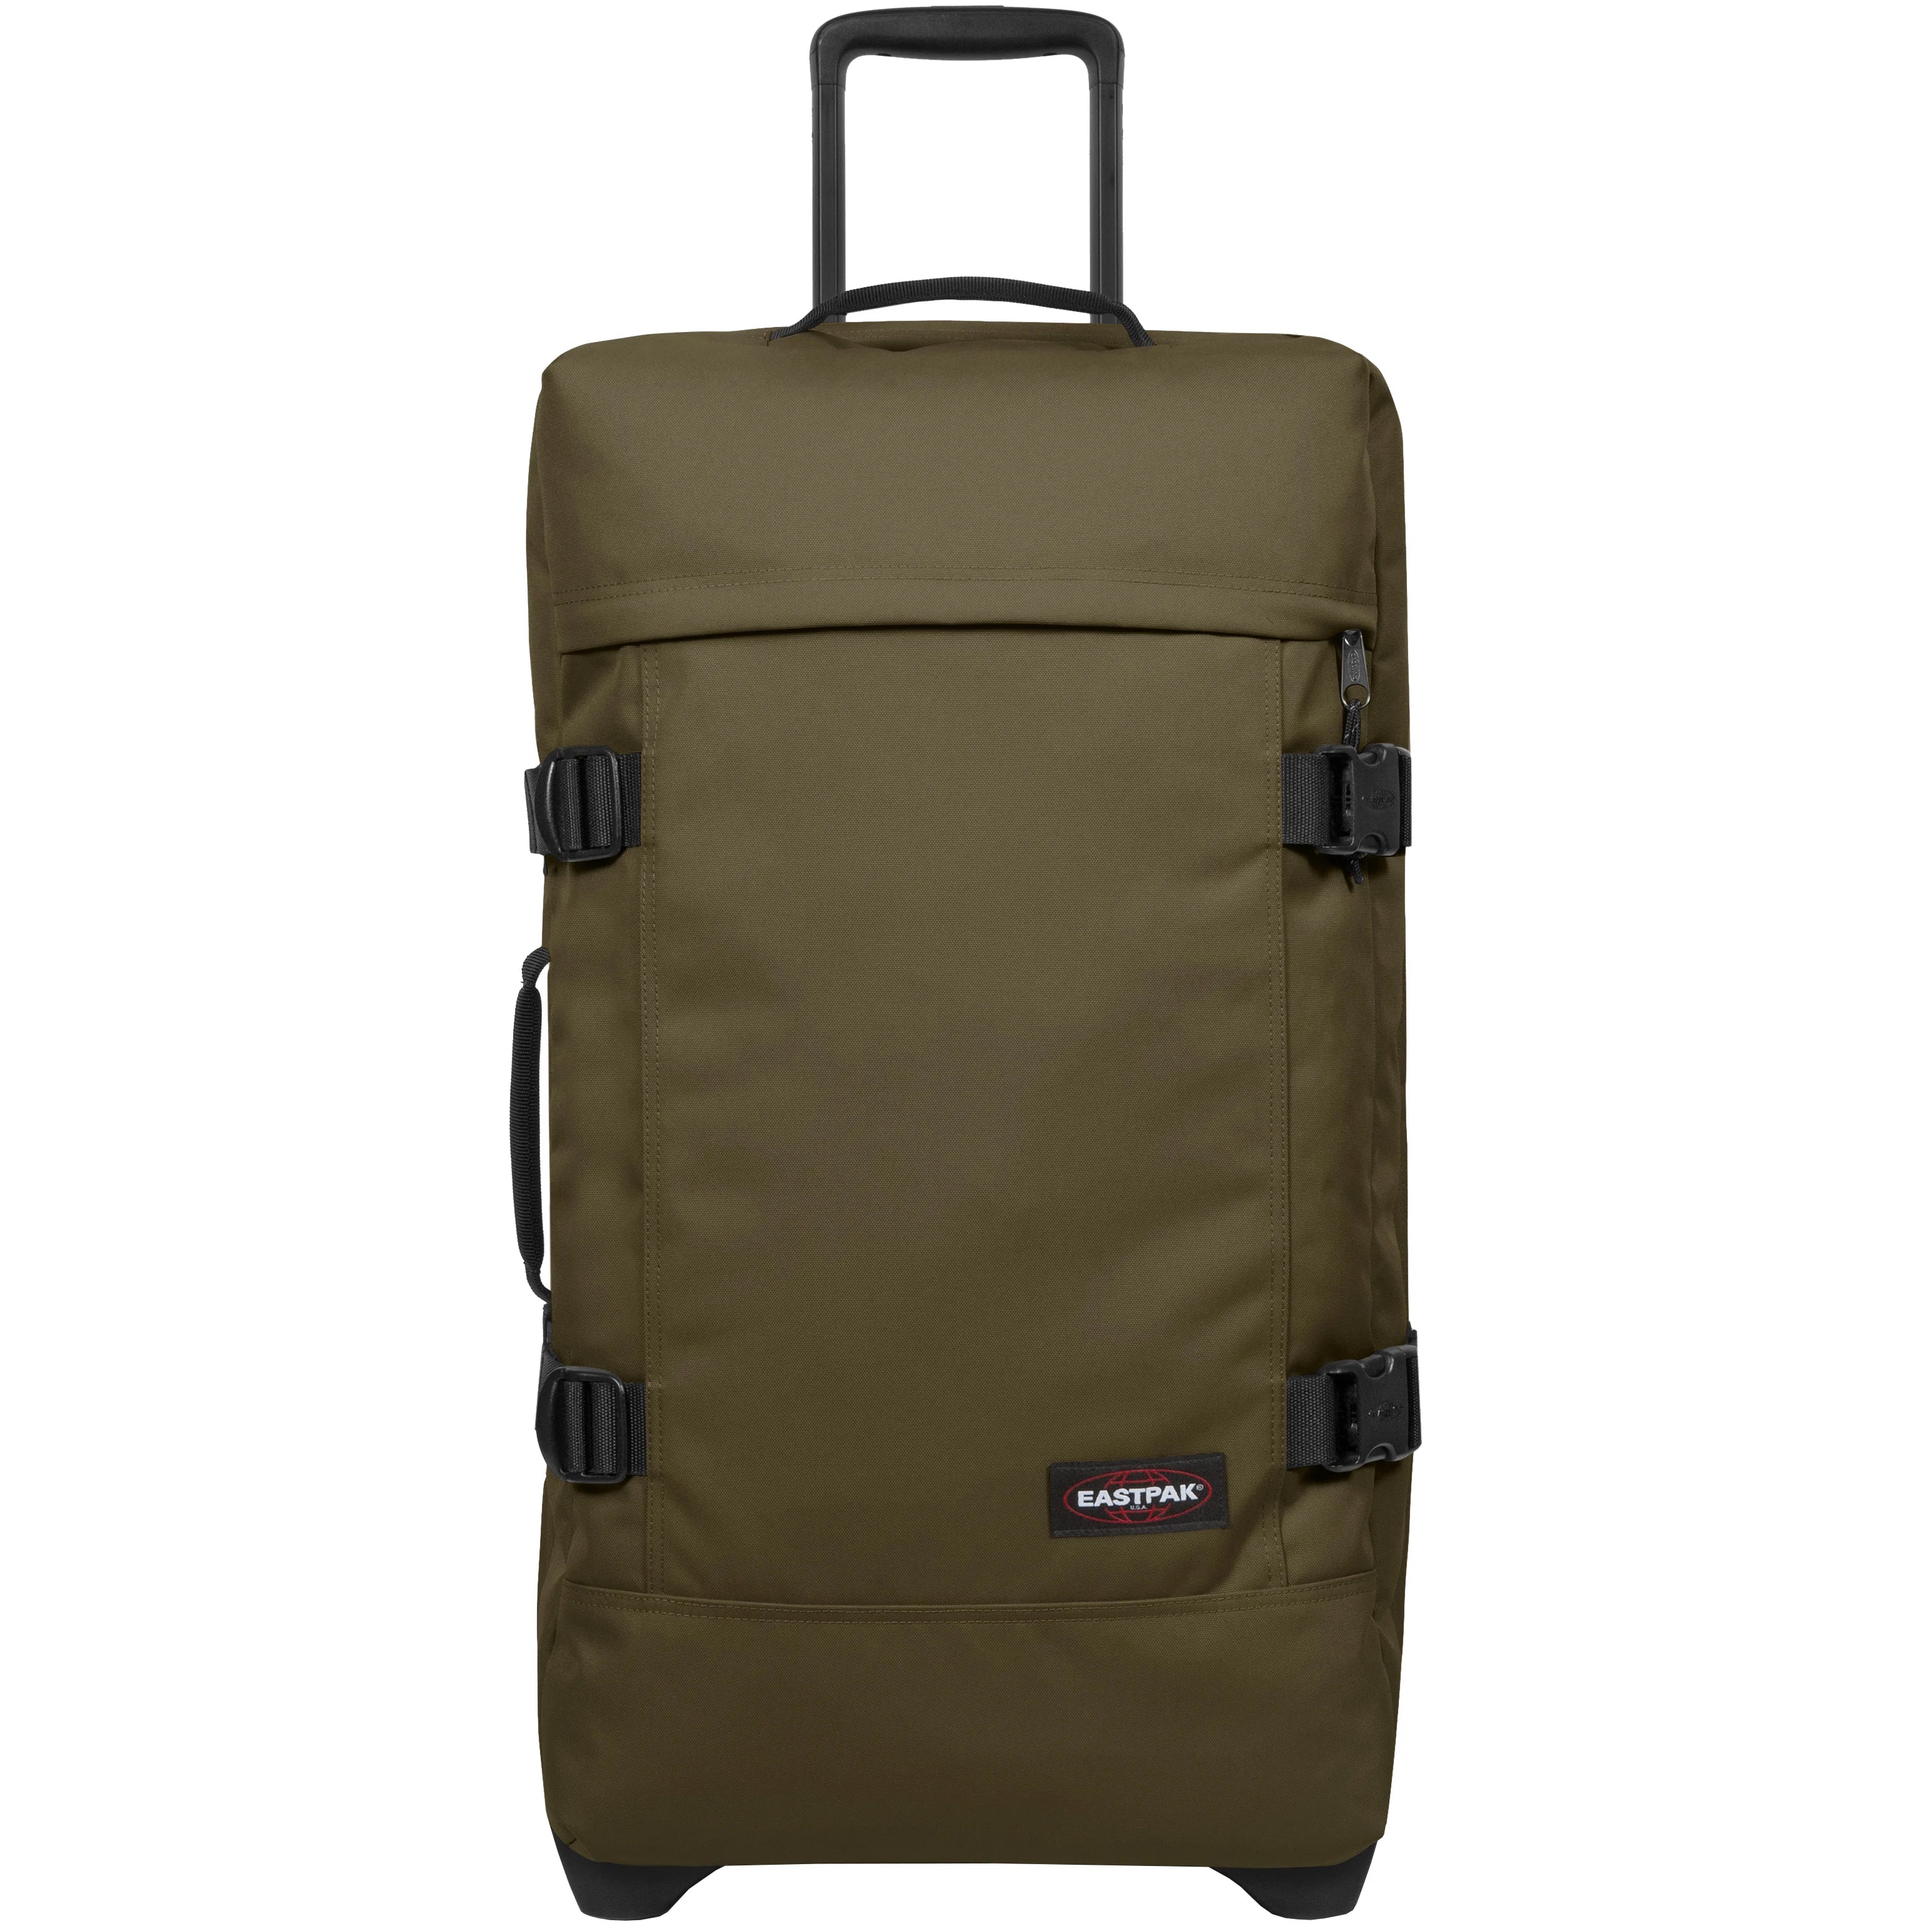 Eastpak Authentic Travel Tranverz 2-Rollen-Trolley 67 cm - Army Olive